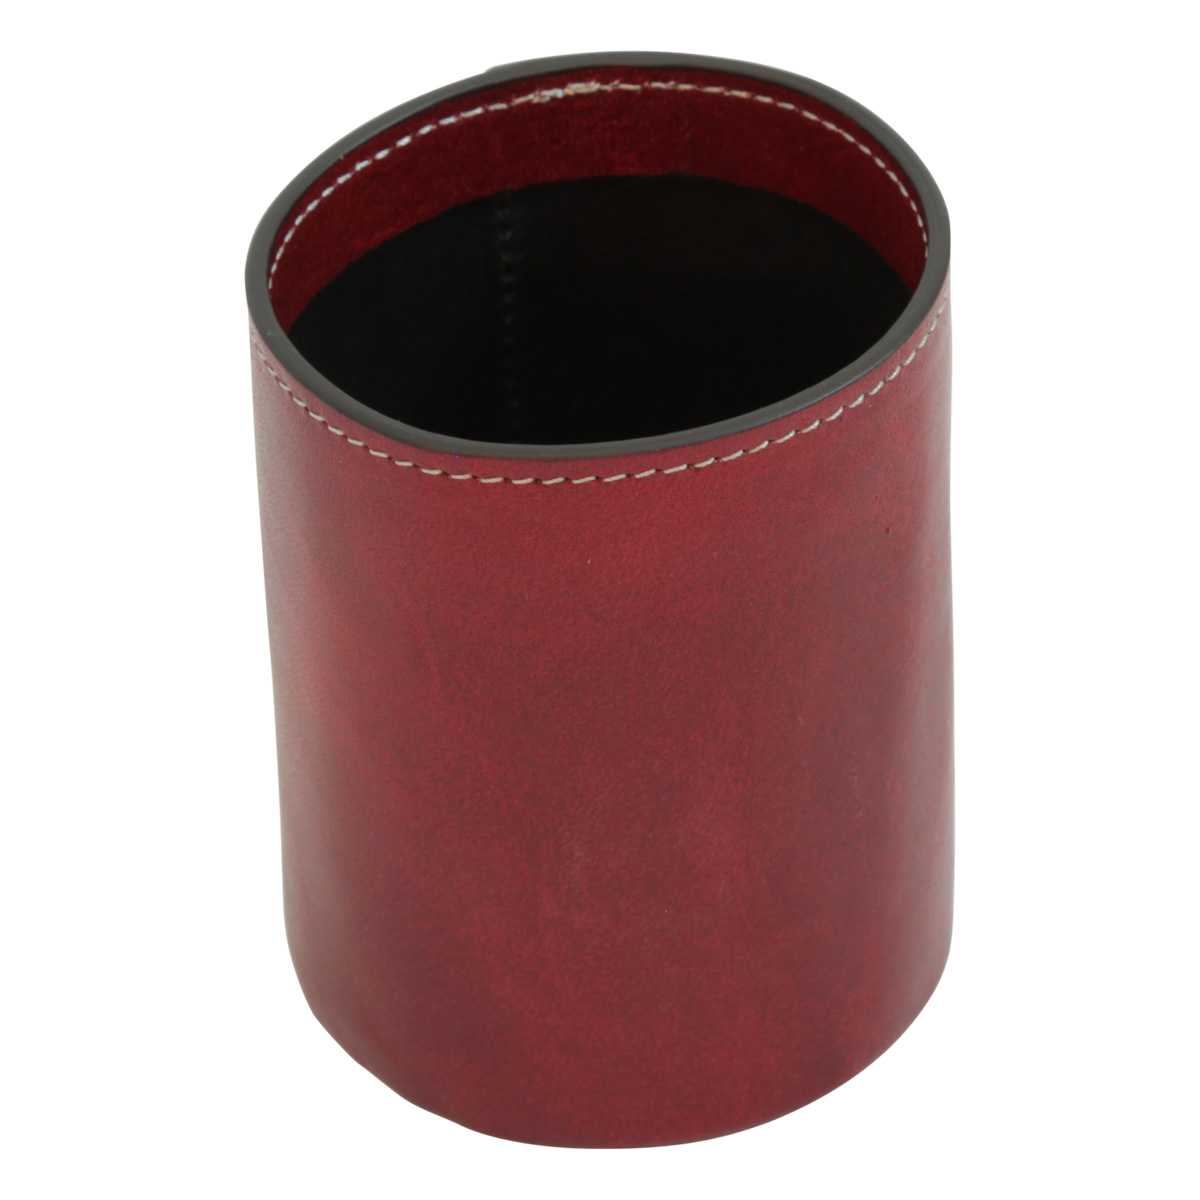 Leather pen cup - red | 763089RO US | Old Angler Firenze